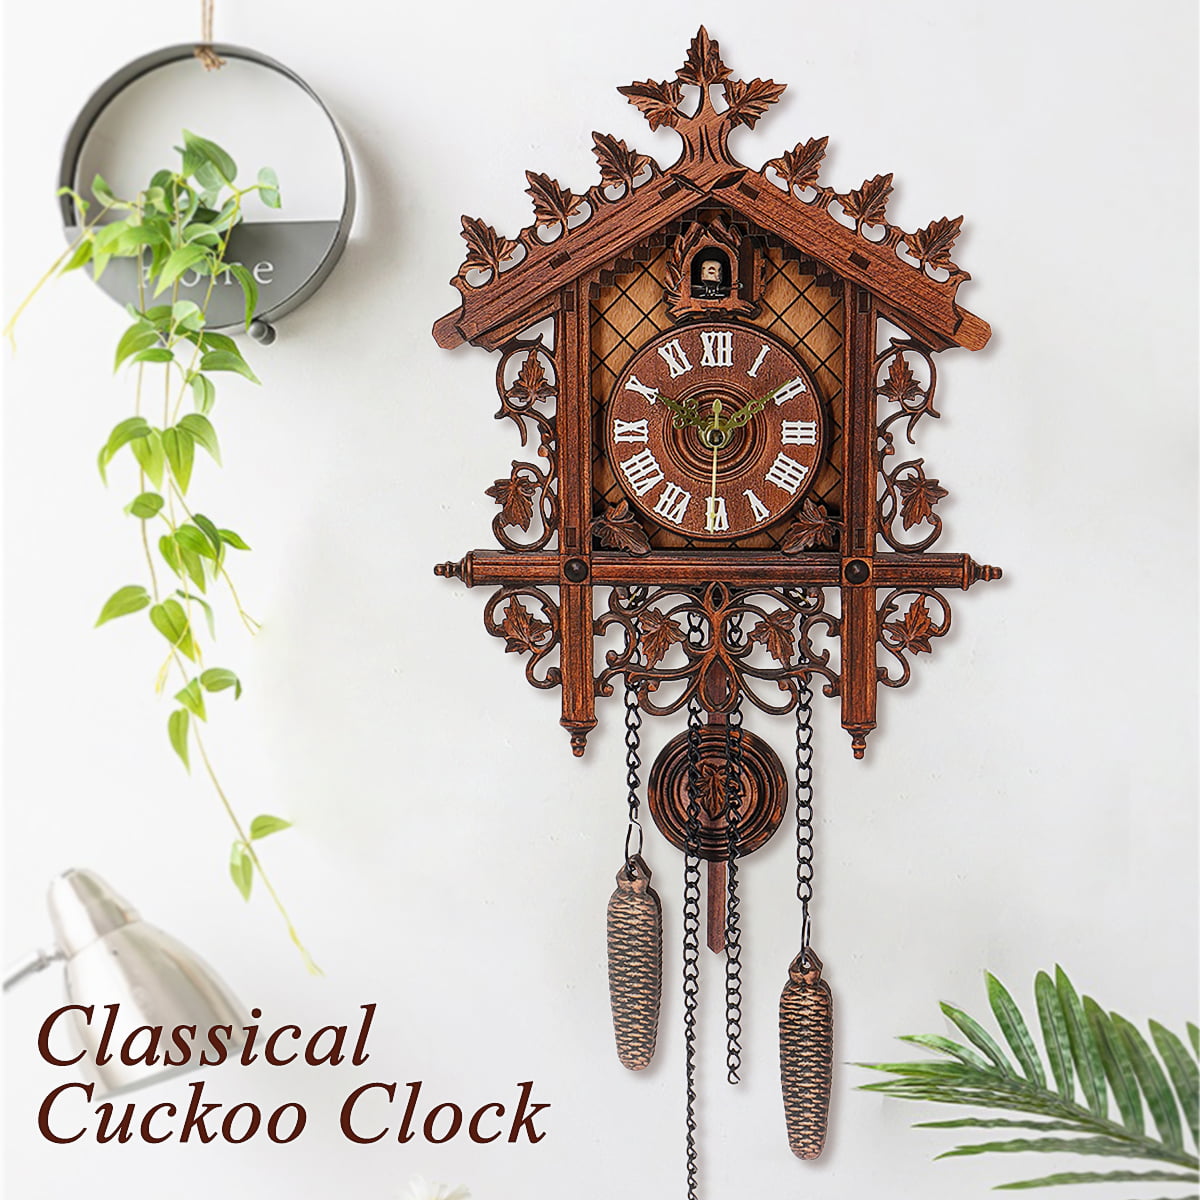 Fullnoon Forest Cuckoo Clock Retro Nordic Style Wooden Cuckoo Wall Mechanical Alarm Clock for Home Office Decoration Wooden Bird Patterned Wall Clock Chalet-Style Wall Clock